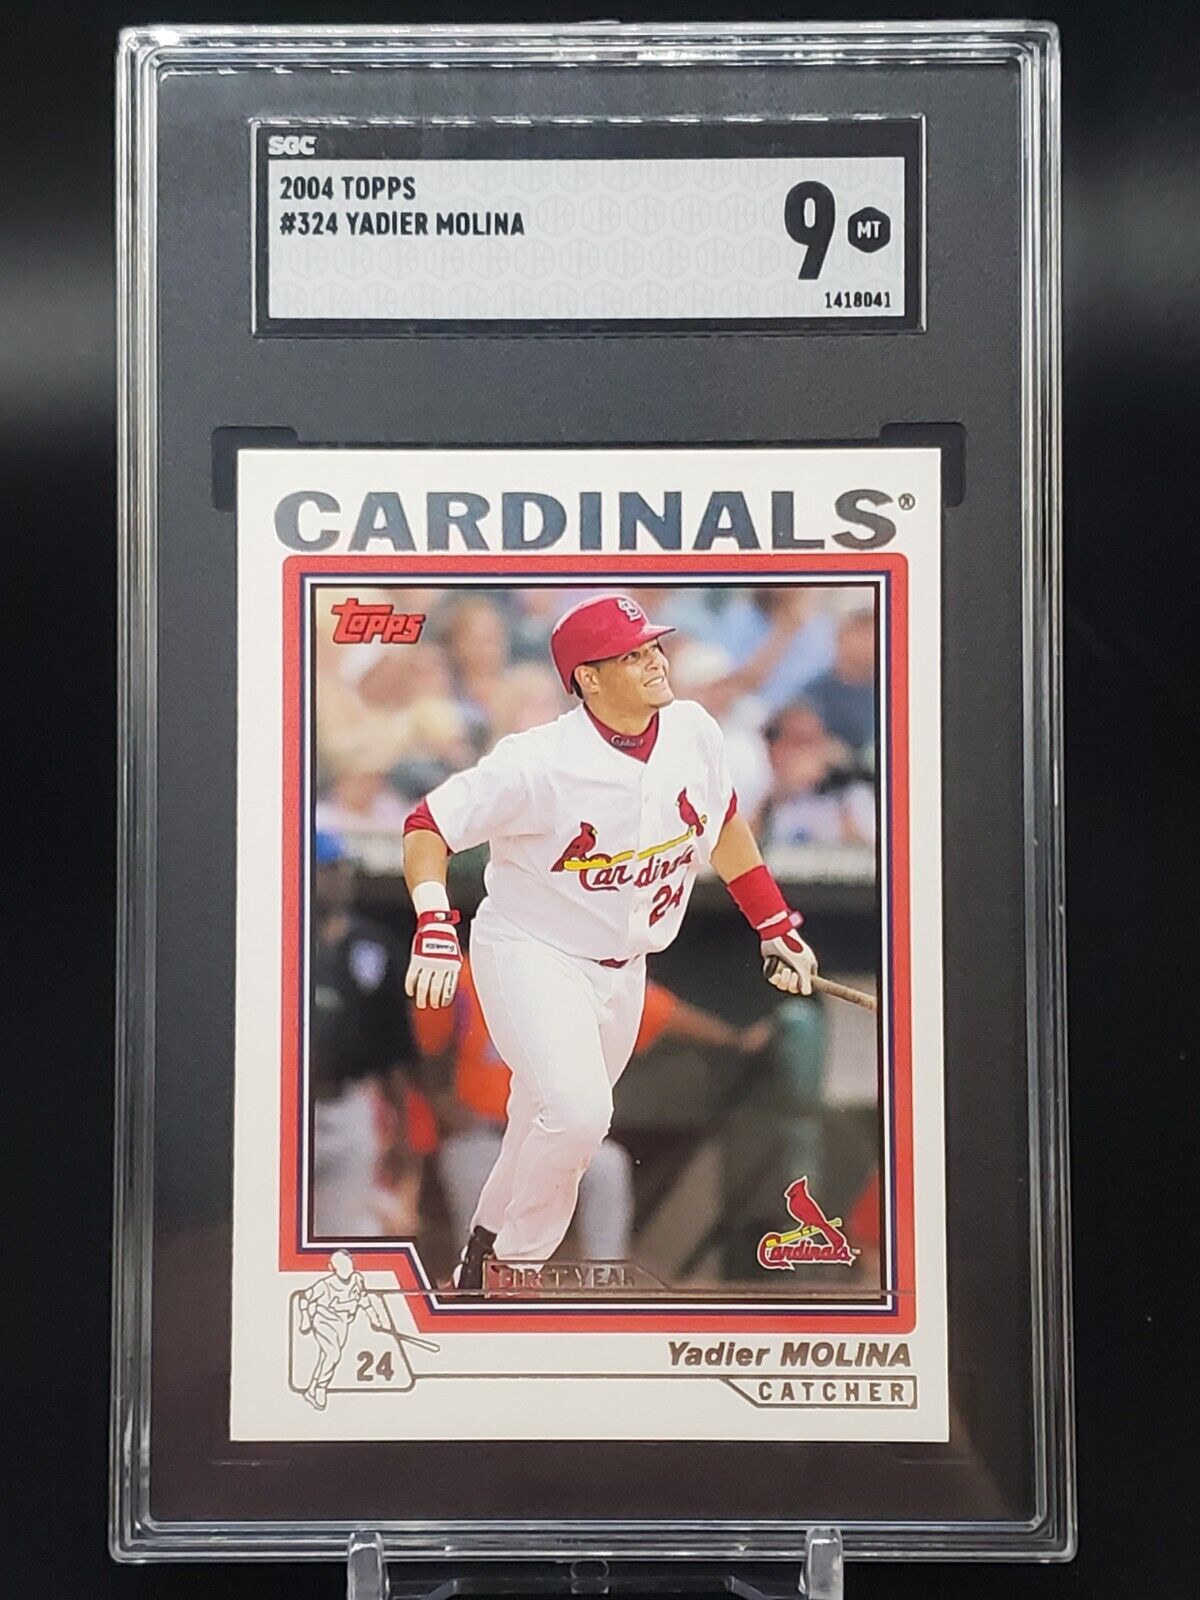 2004 Topps Yadier Molina Rookie RC St. Louis Cardinals 324 SGC 9